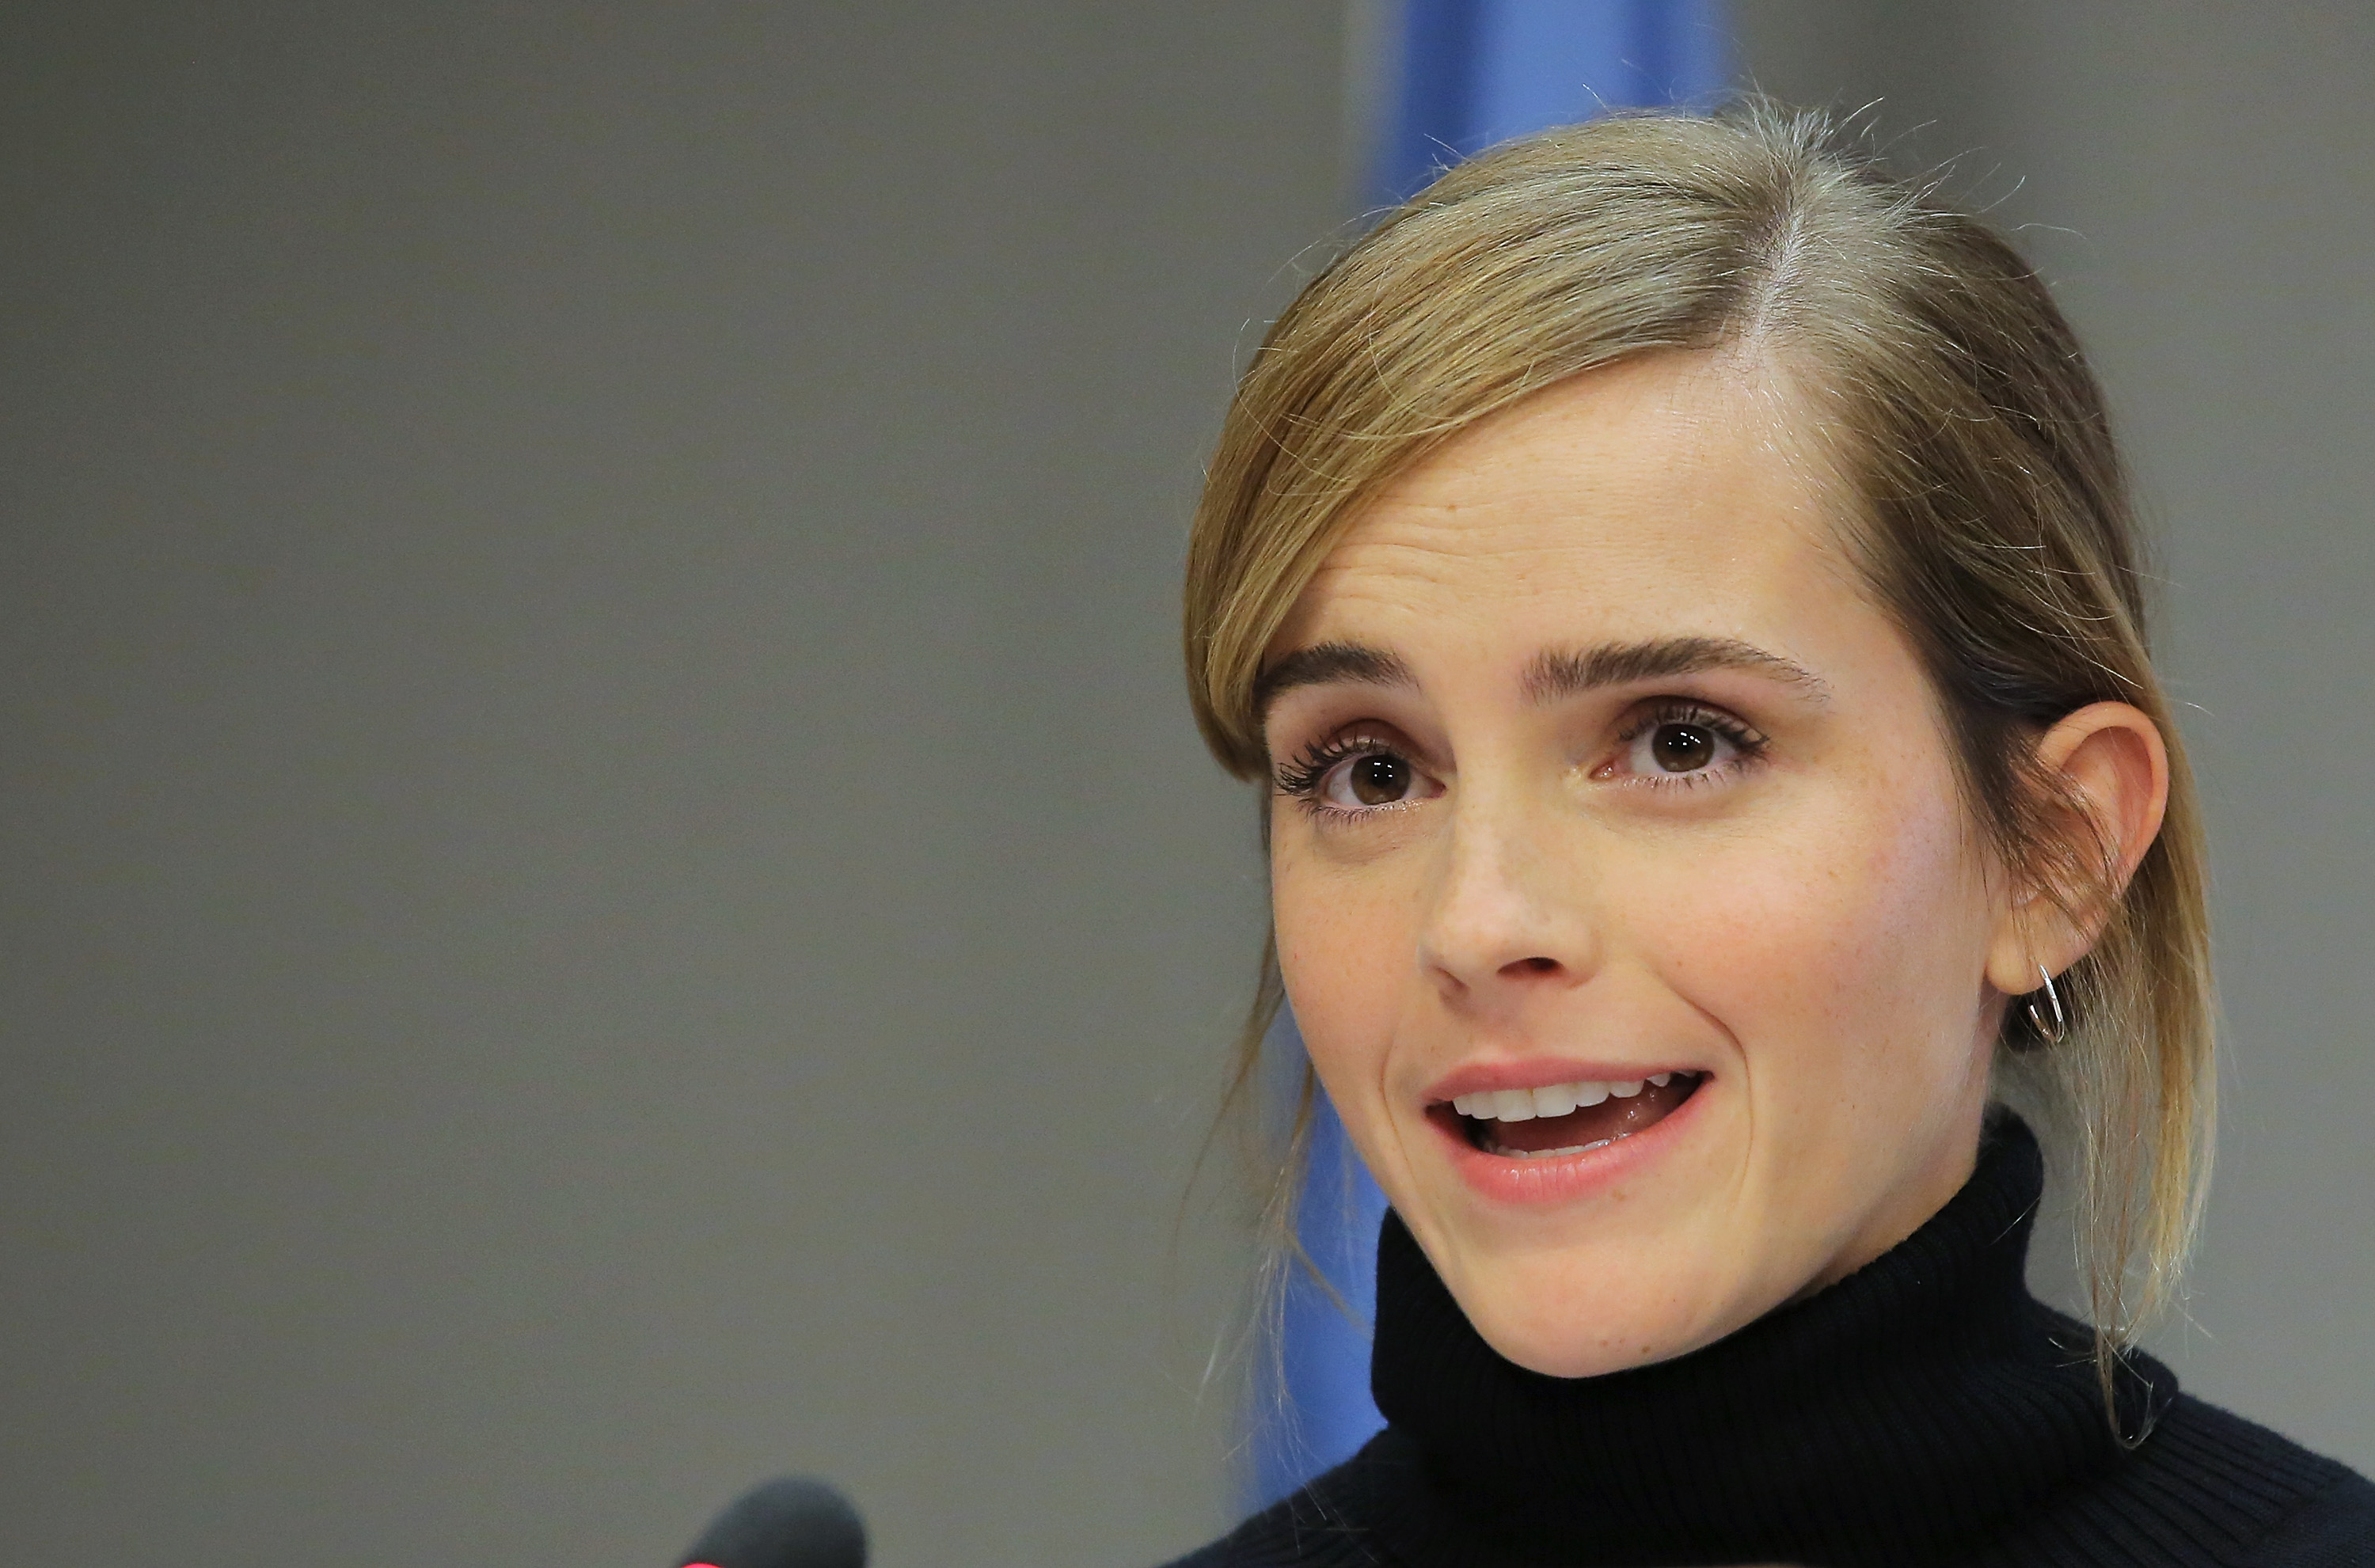 Emma Watson Speaks At the launch of the HeForShe IMPACT 10x10x10 University Parity Report at The United Nations